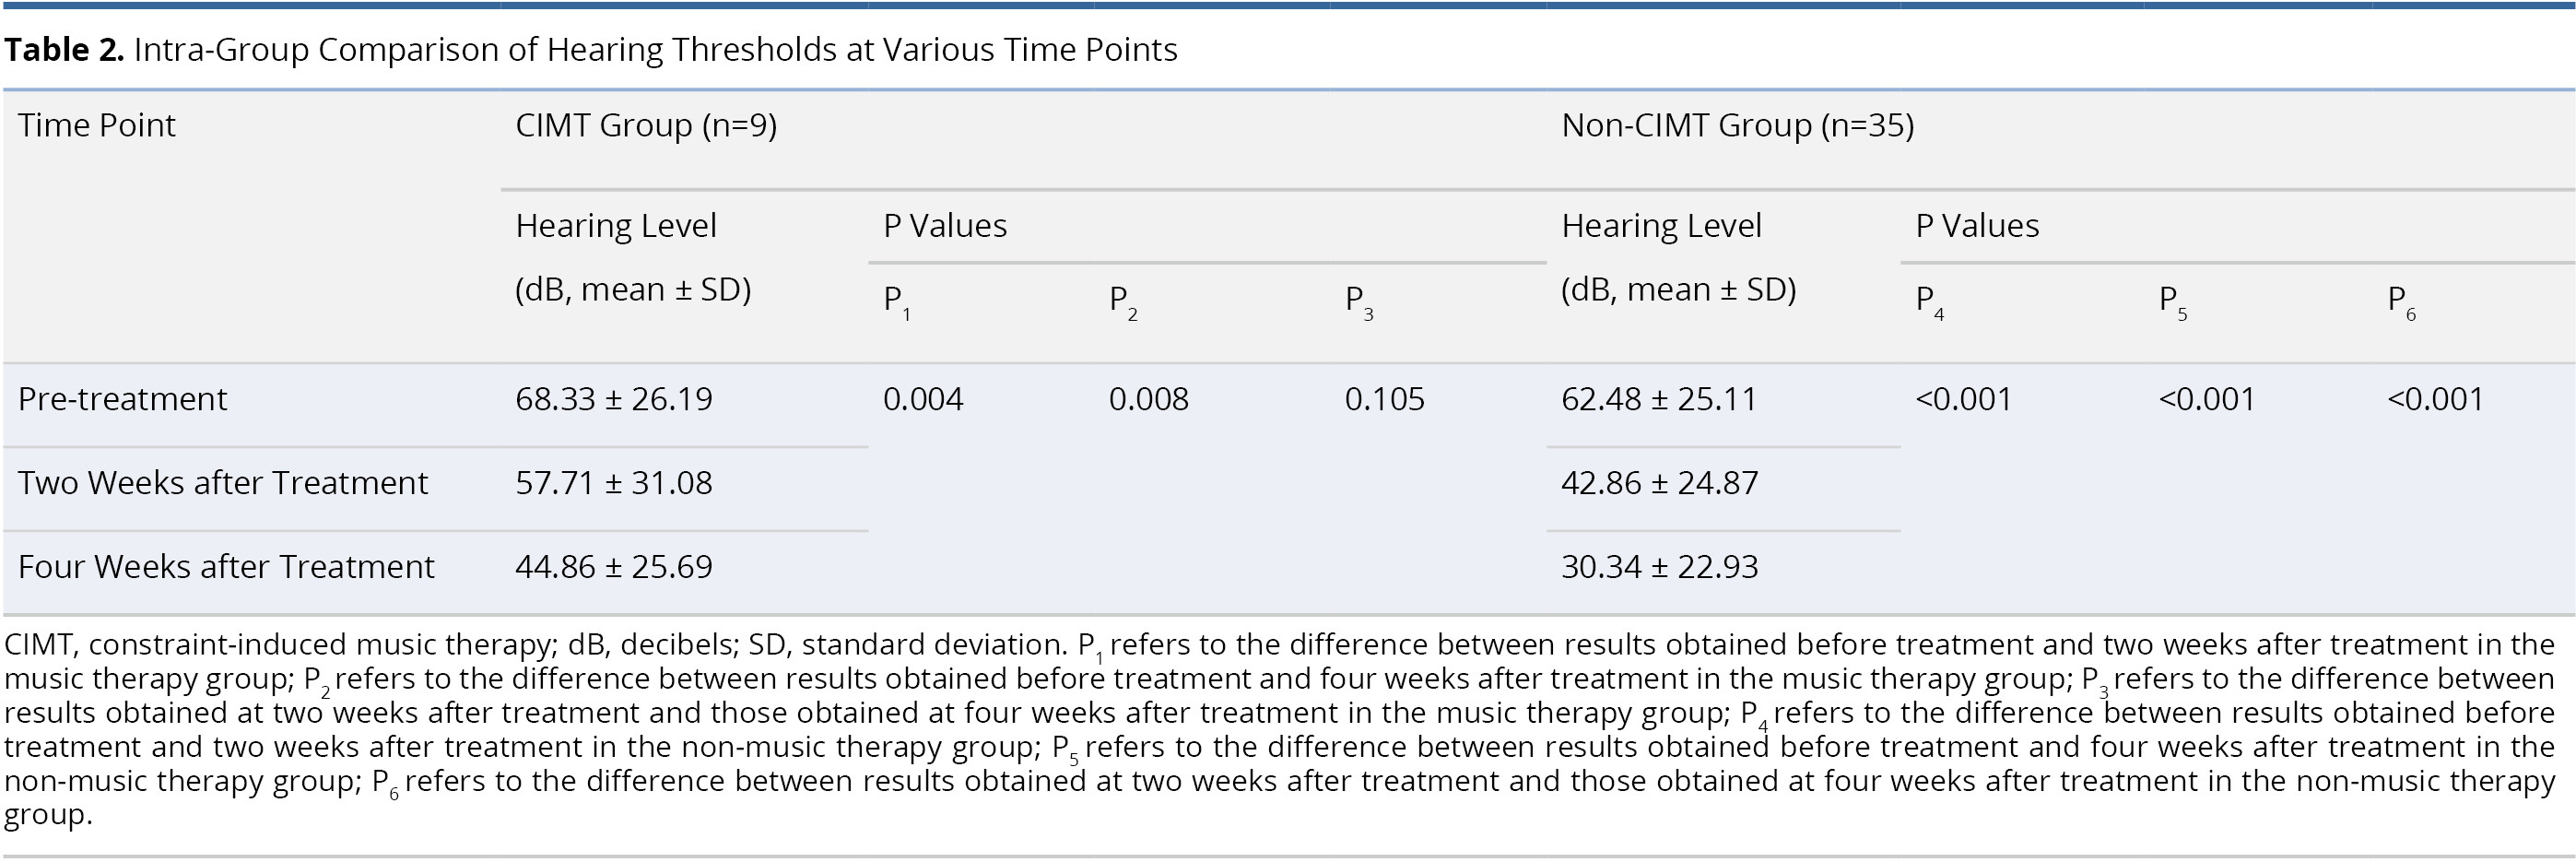 Table 2.jpgIntra-Group Comparison of Hearing Thresholds at Various Time Points